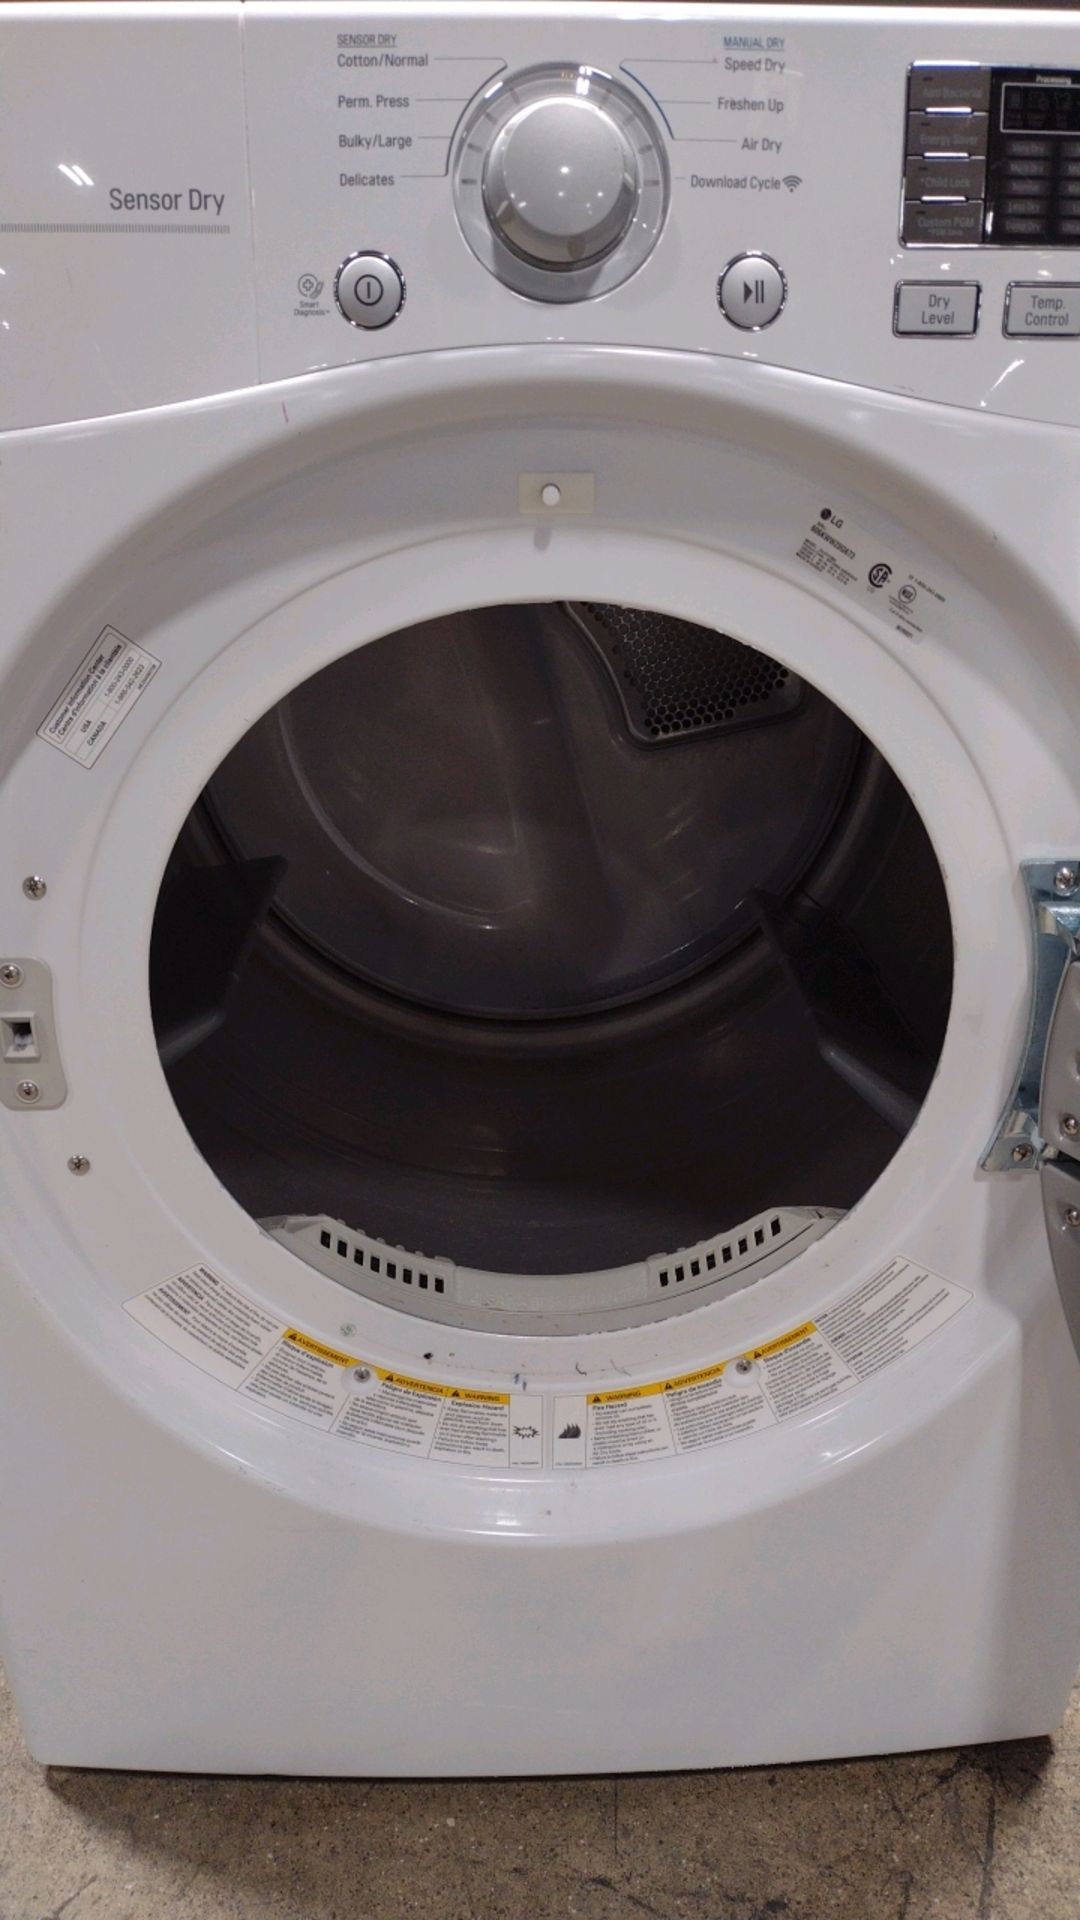 LG DLE3170W DRYER MACHINE (LOCATED AT 3325 MOUNT PROSPECT ROAD, FRANKLIN PARK, IL, 60131) - Image 2 of 3